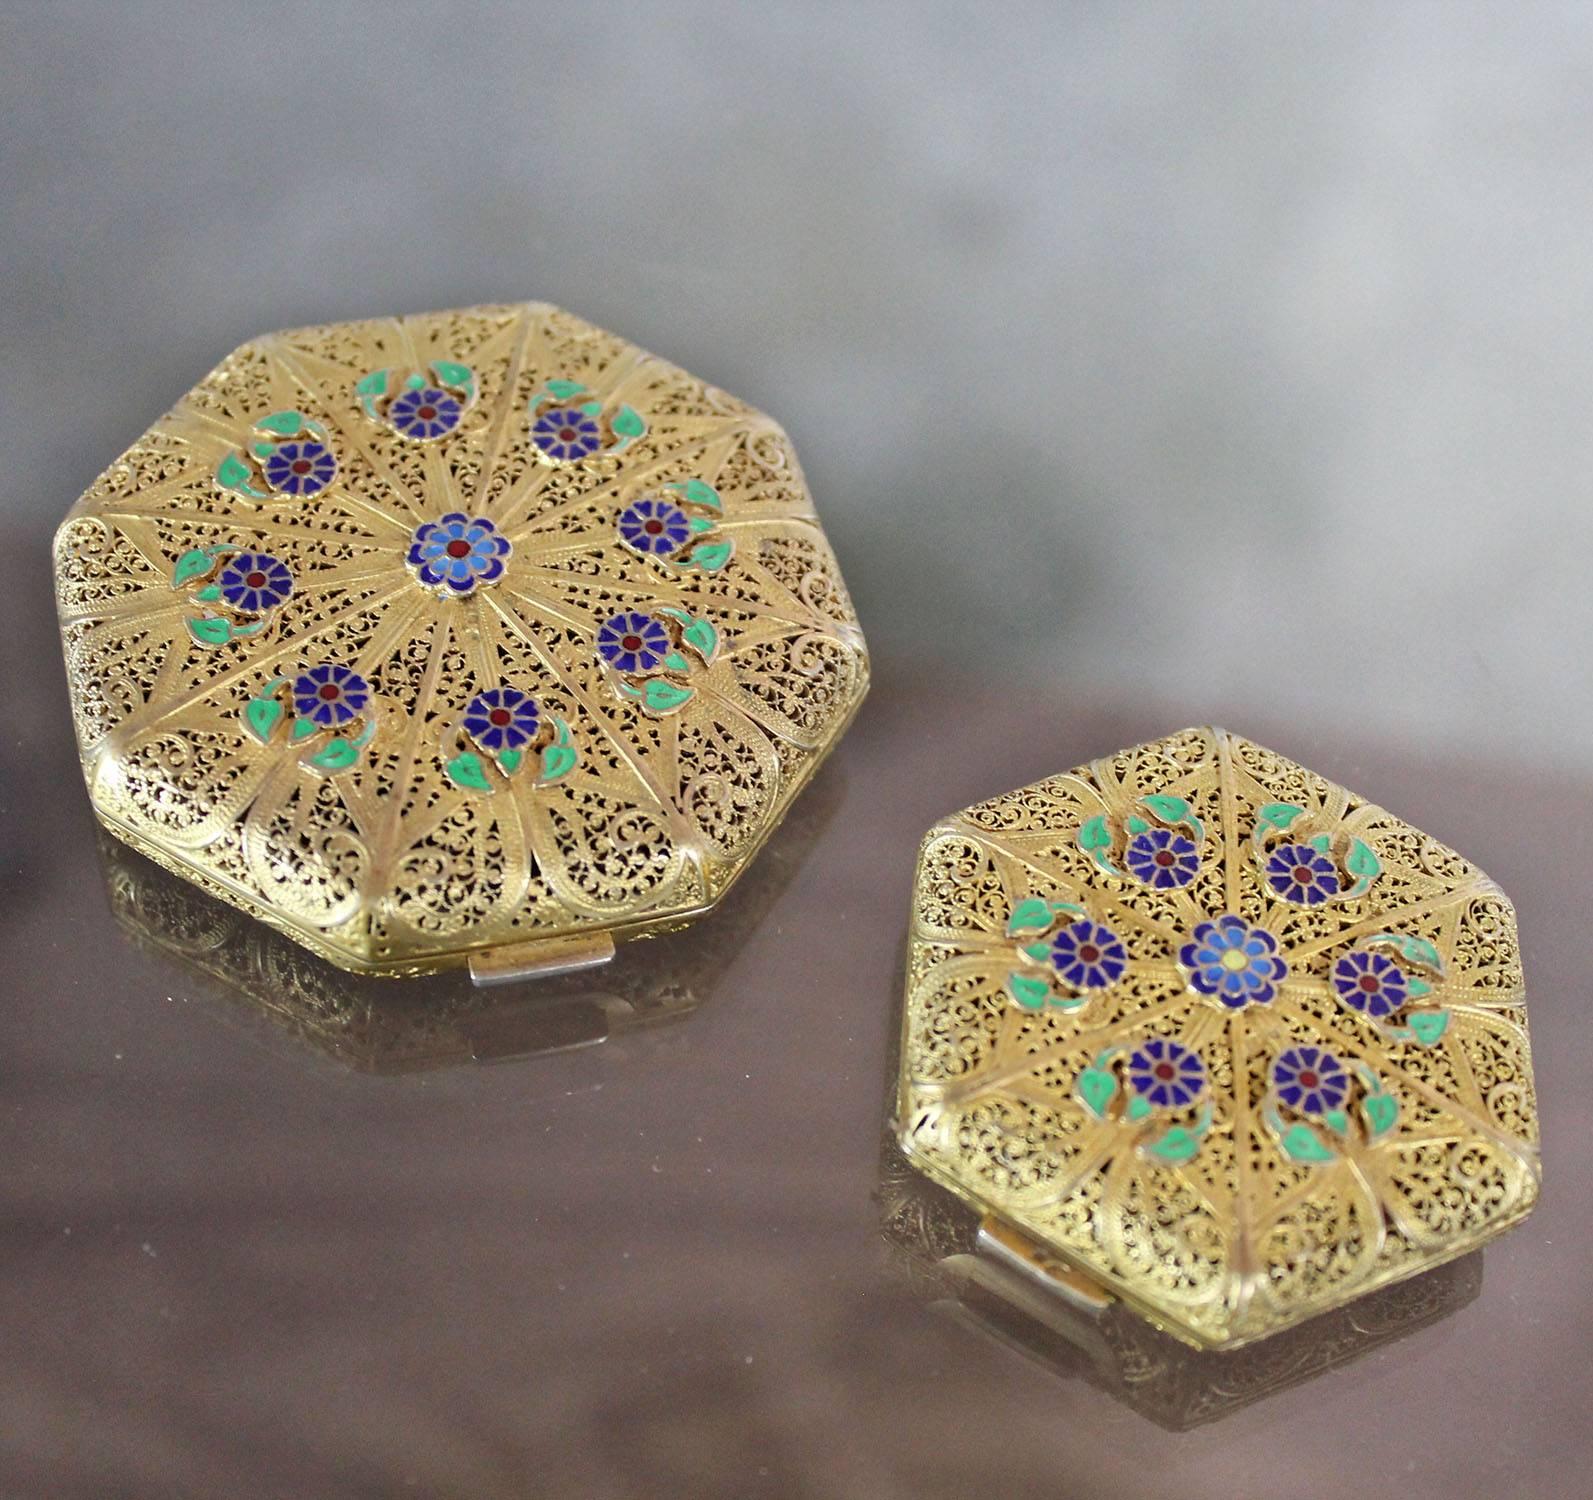 Extraordinarilly beautiful pair of vintage vermeil filigree powder and rouge compacts. This pair is in fabulous condition.

What a beautiful and extraordinary pair of vintage compacts. They are octagonal in shape and finely made of filigree and